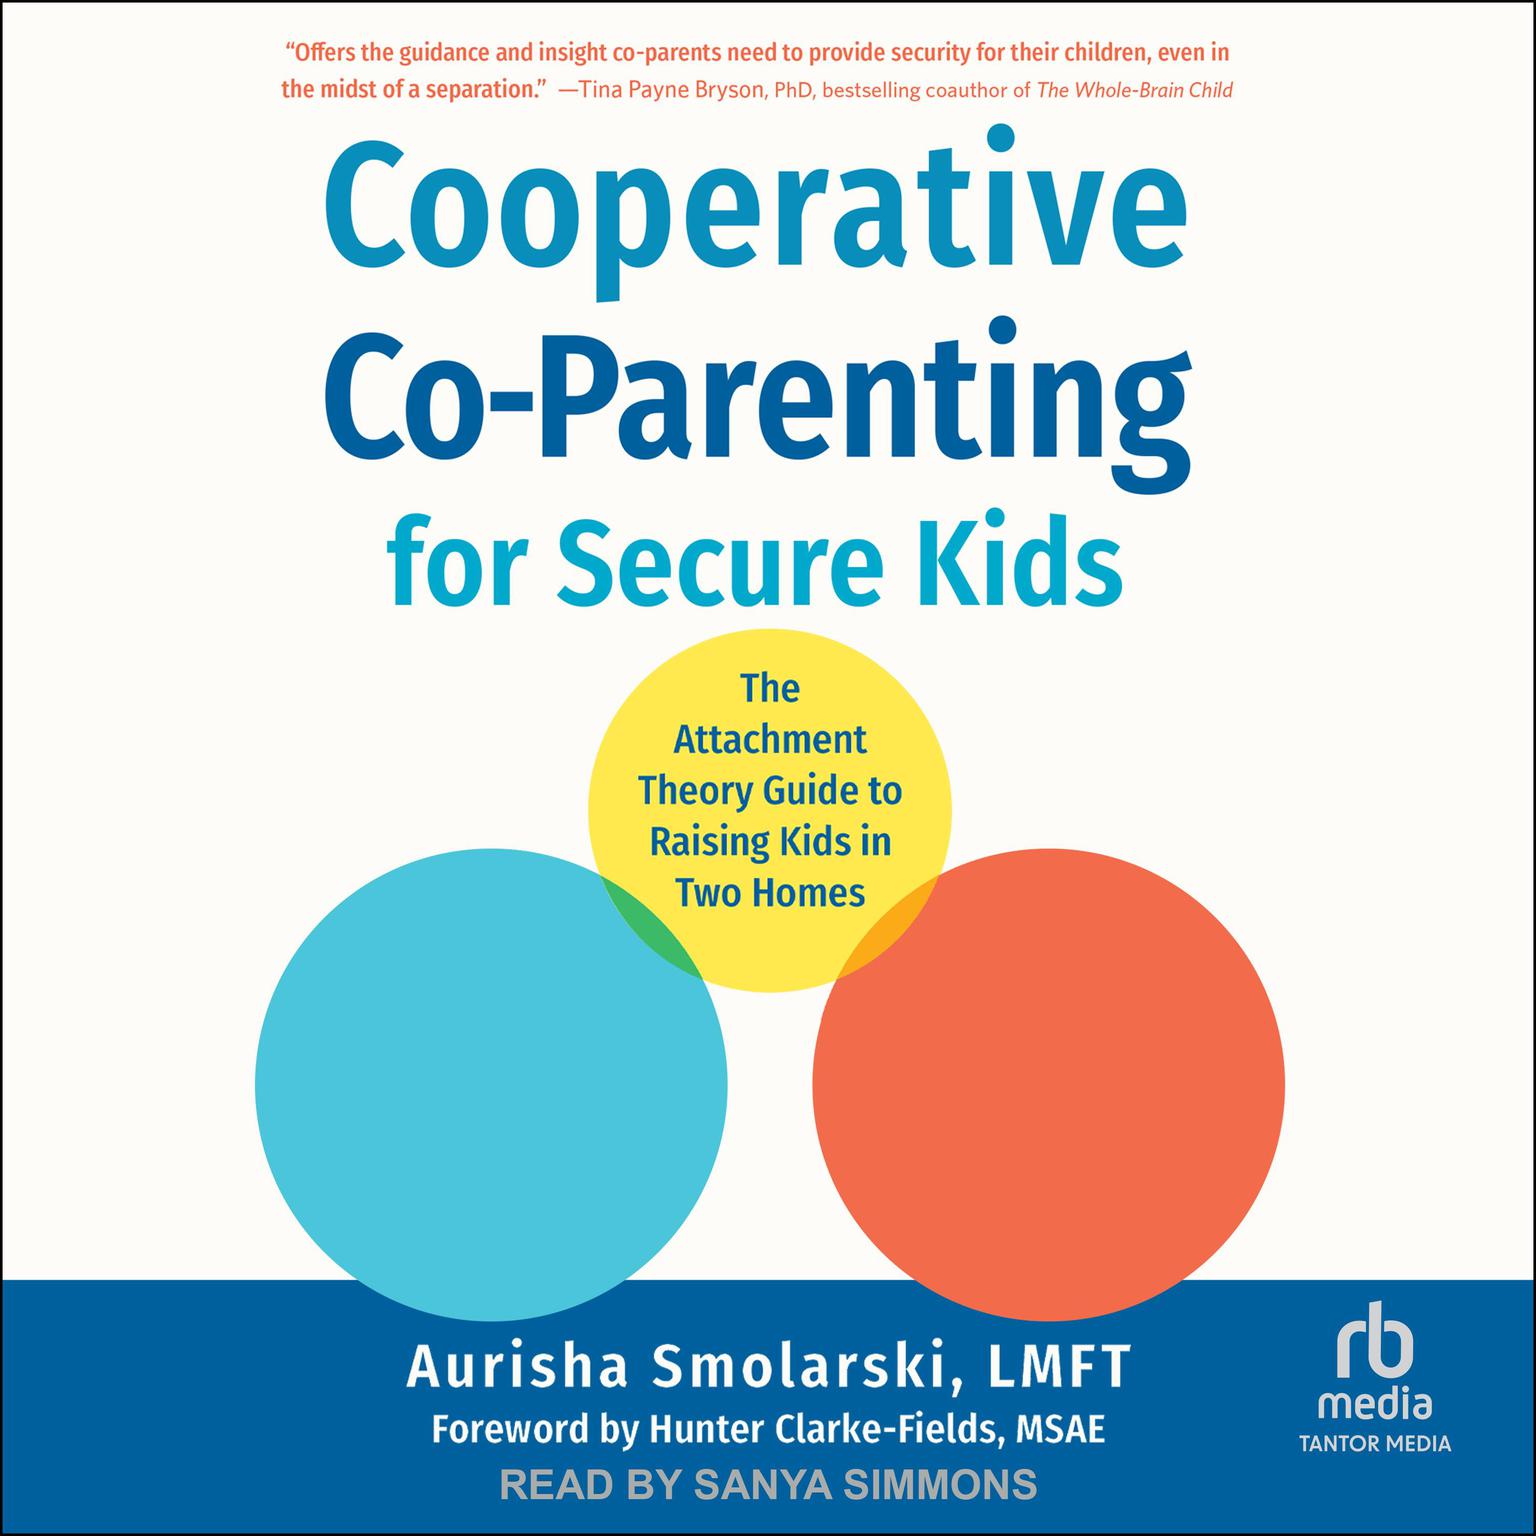 Cooperative Co-Parenting for Secure Kids: The Attachment Theory Guide to Raising Kids in Two Homes Audiobook, by Aurisha Smolarski, LMFT